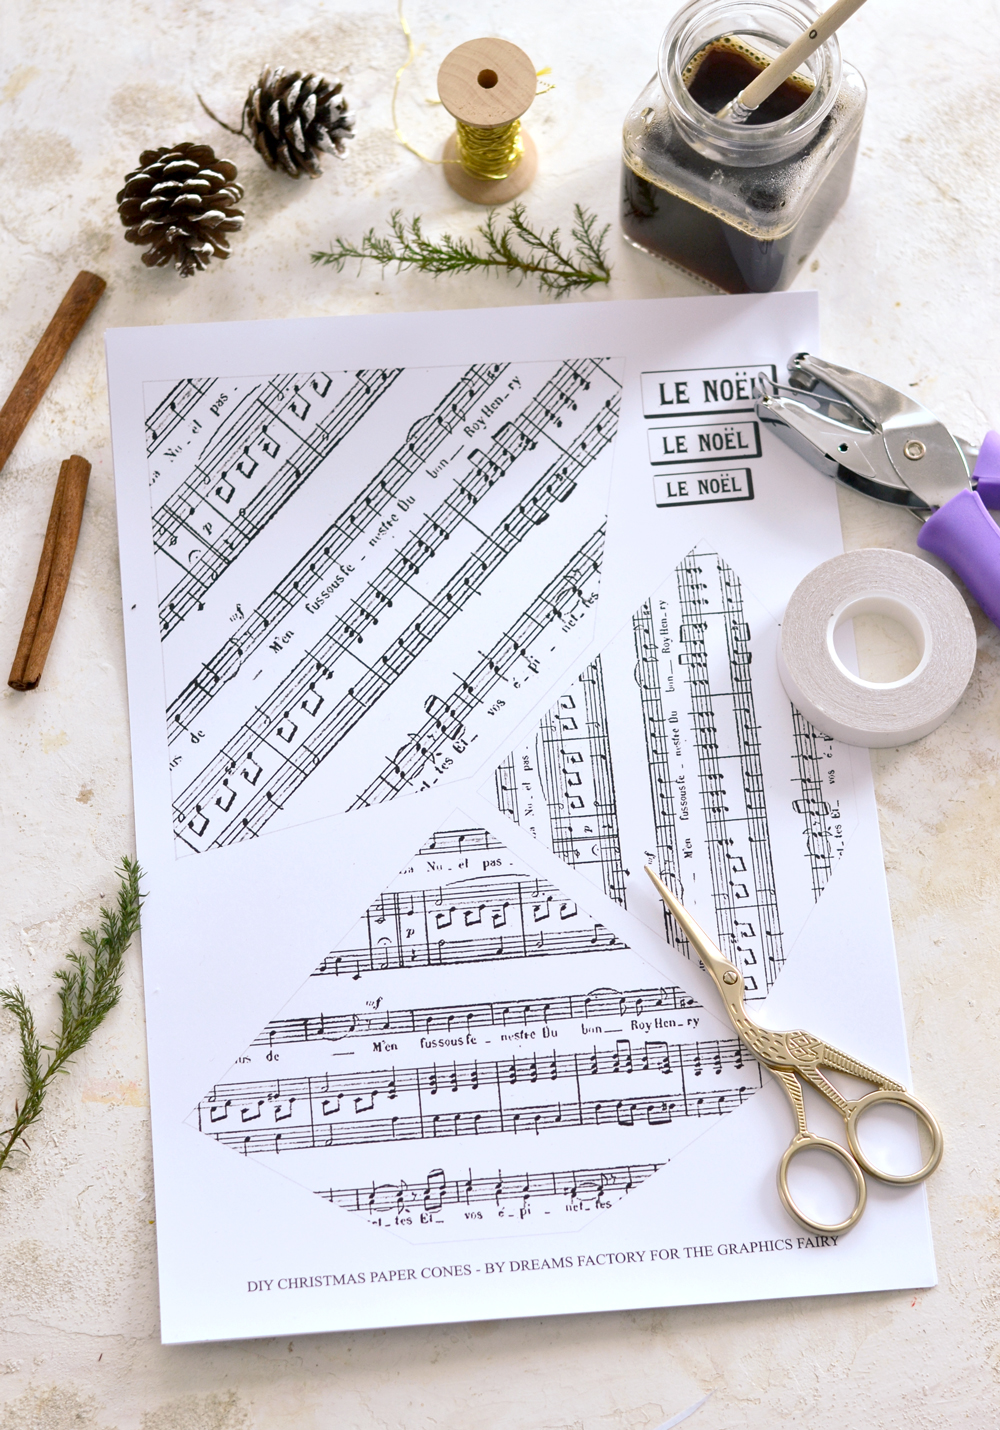 Paper cone free printable templates and all the supplies for creating the project